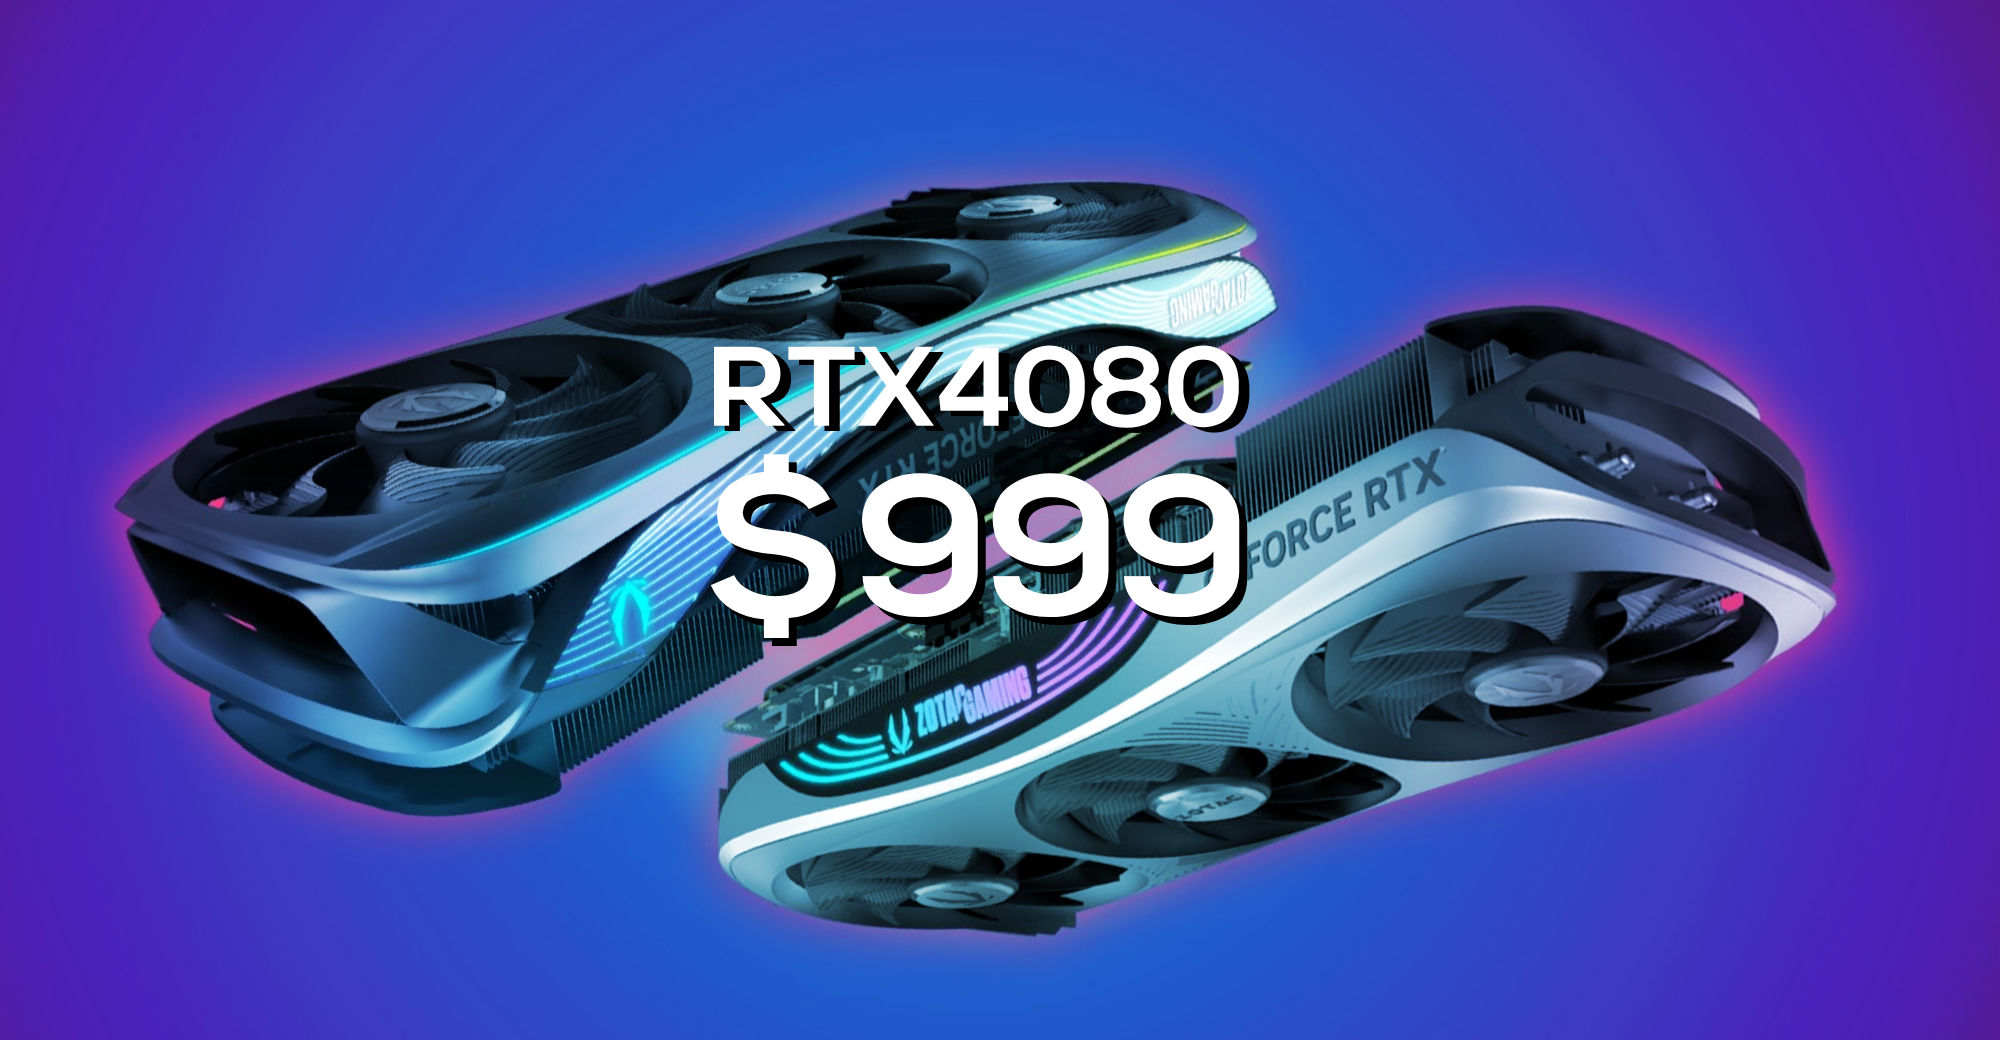 New RX 6800 XT price drop: $700 on B&H Photo or